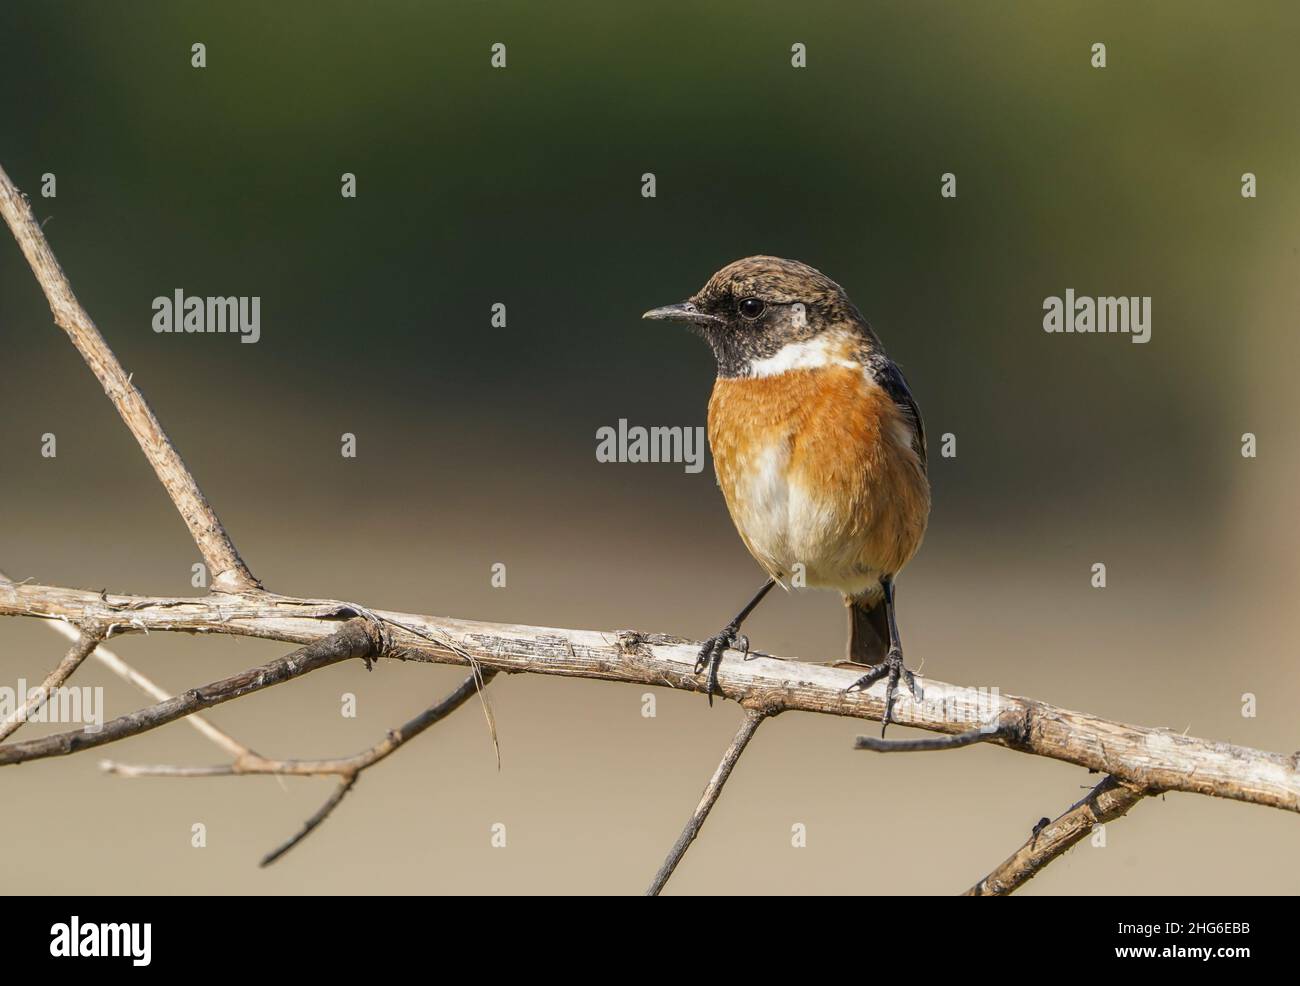 Male European stonechat (Saxicola rubicola) on the top of a branch, Andalucia, Spain. Stock Photo